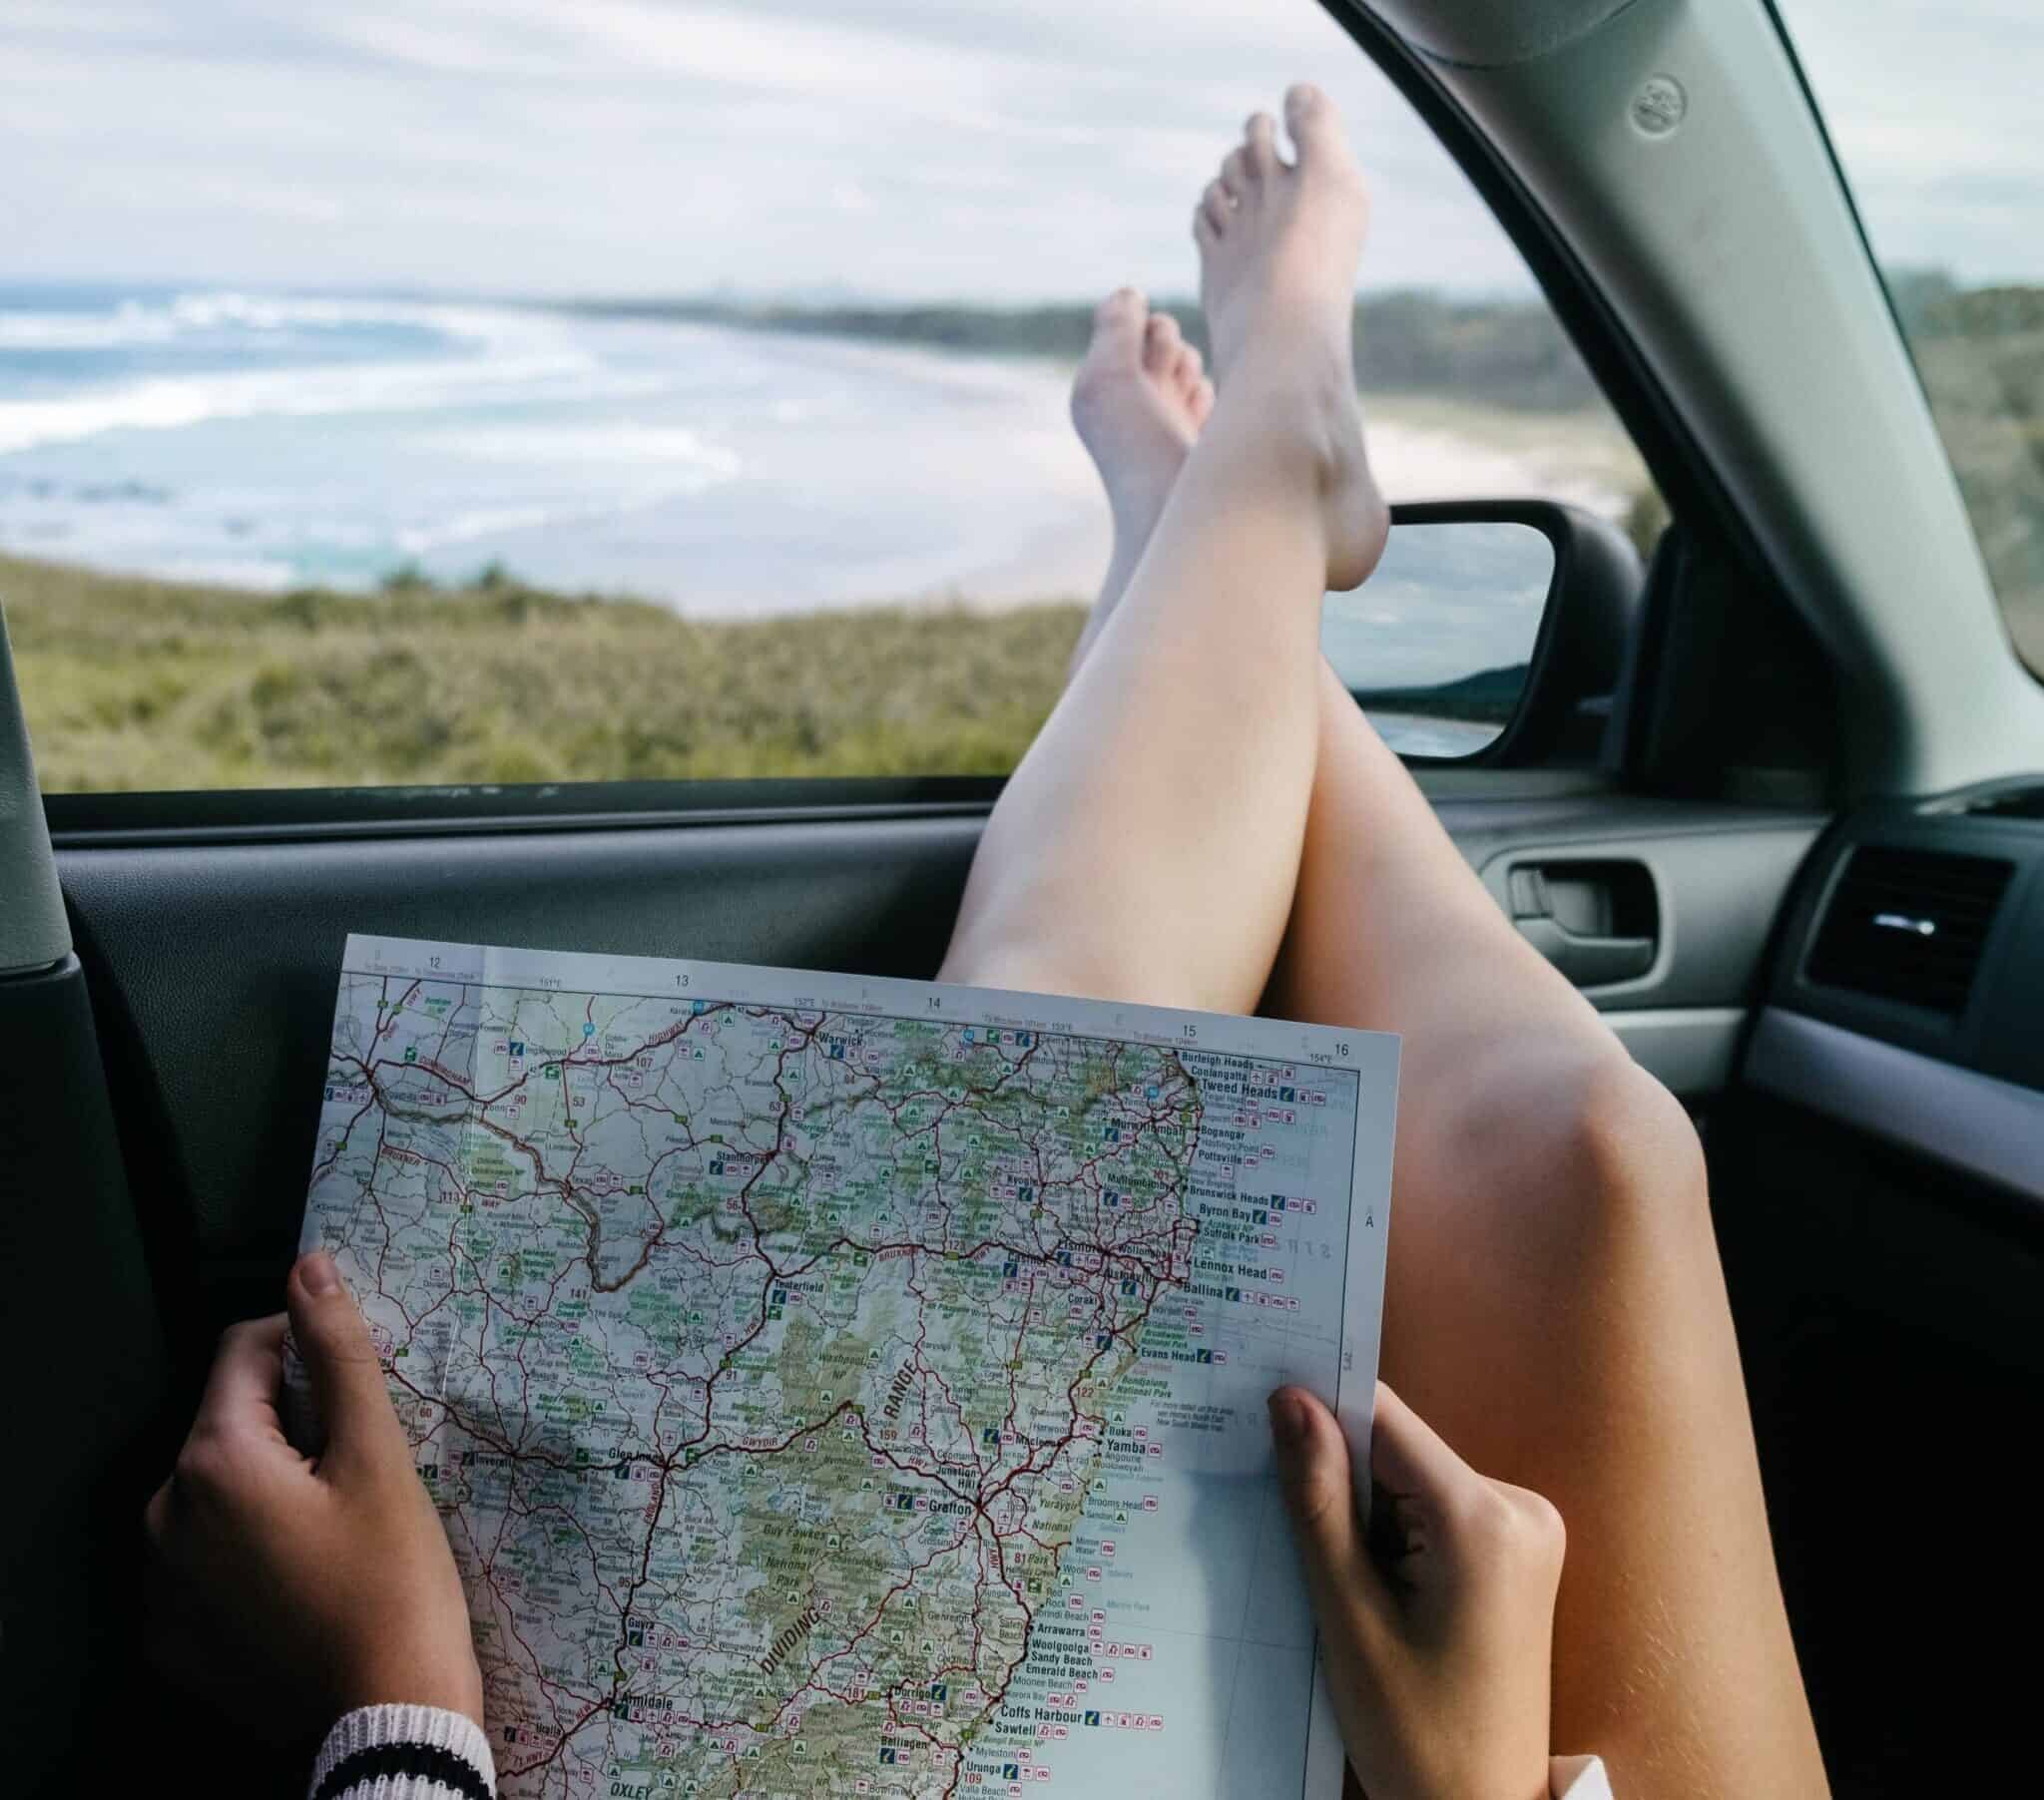 Legs hang out of the car window with a map on their laps